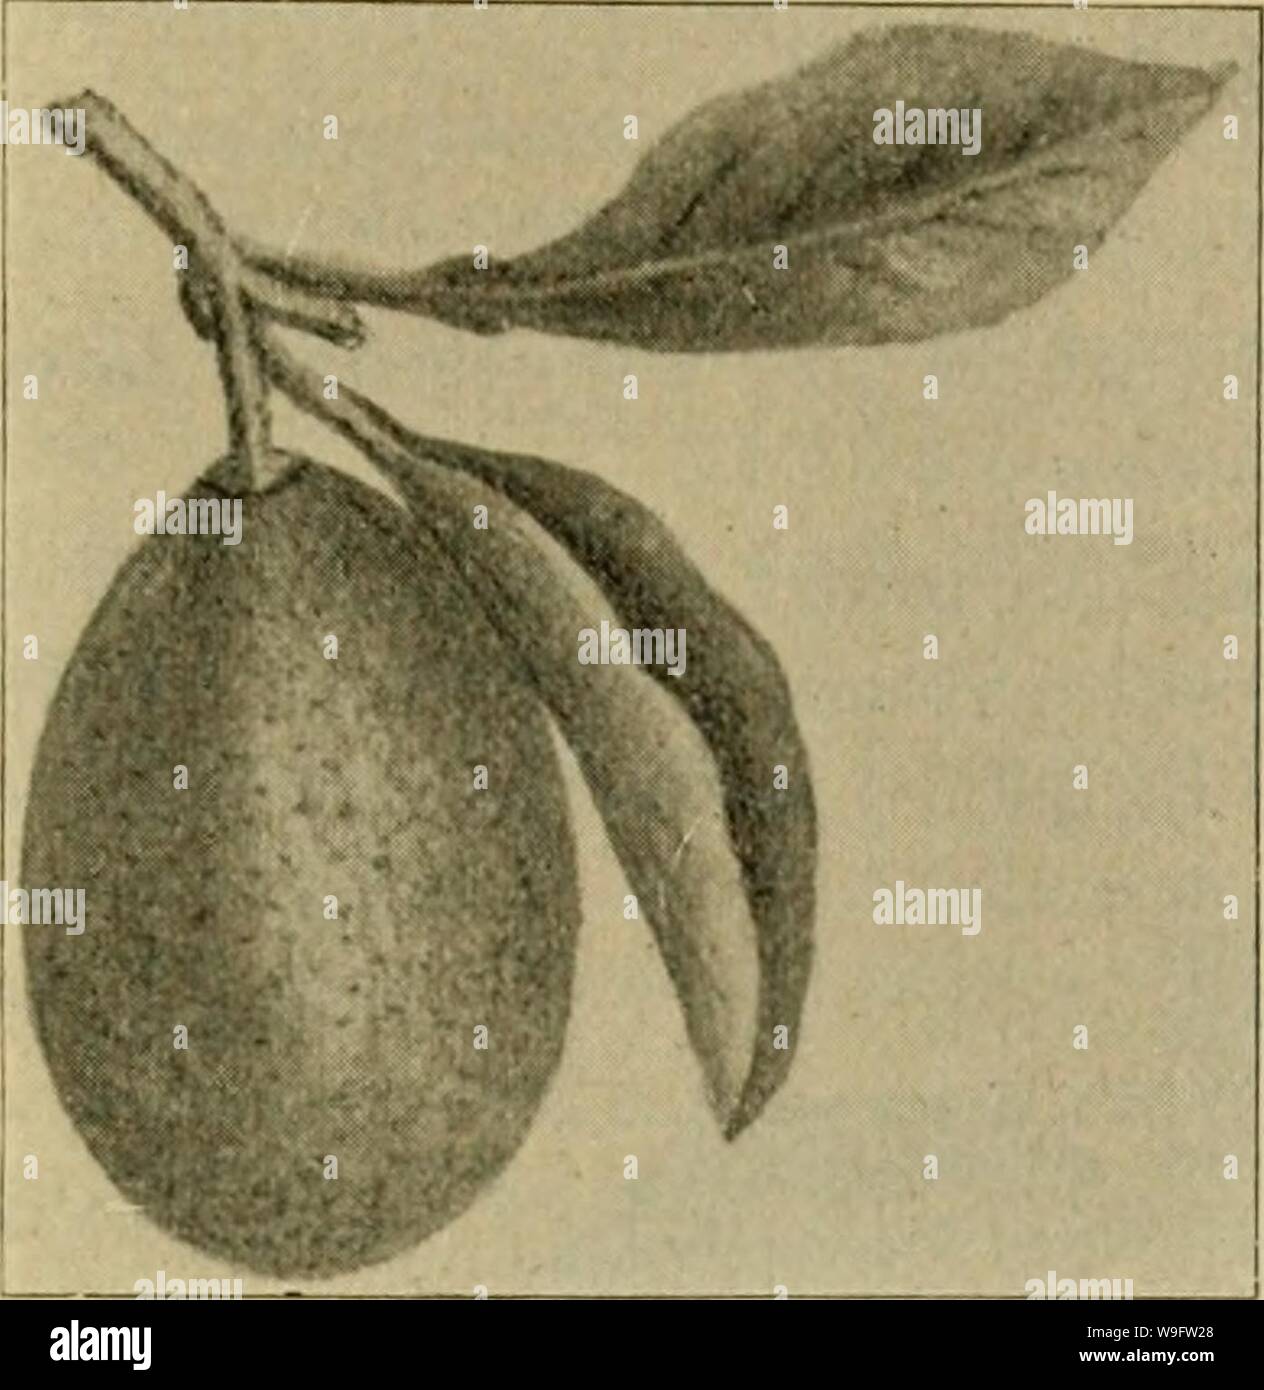 Archive image from page 72 of Culture of the citrus in. Culture of the citrus in California  cultureofcitrusi00lelo Year: 1902 ( THE ORANGE IN CALIFORNIA—VARIETIES. 69    Olive-Shaped Kumquat—natural size. Kumquat Type. Citrus aurantium, var. Japon- ica, Thunberg. Olive-Shaped.—Fruit very small,olive-shaped,rind thick, yellow, smooth, sweet-scented, very little pulp, contains many seeds. Tree dwarf (a bush), four to six feet; a very prolific bearer. The fruit is edible whole; the rind has a pleas- ant aroma. Valuable for pre- serves and marmalades. Stock Photo